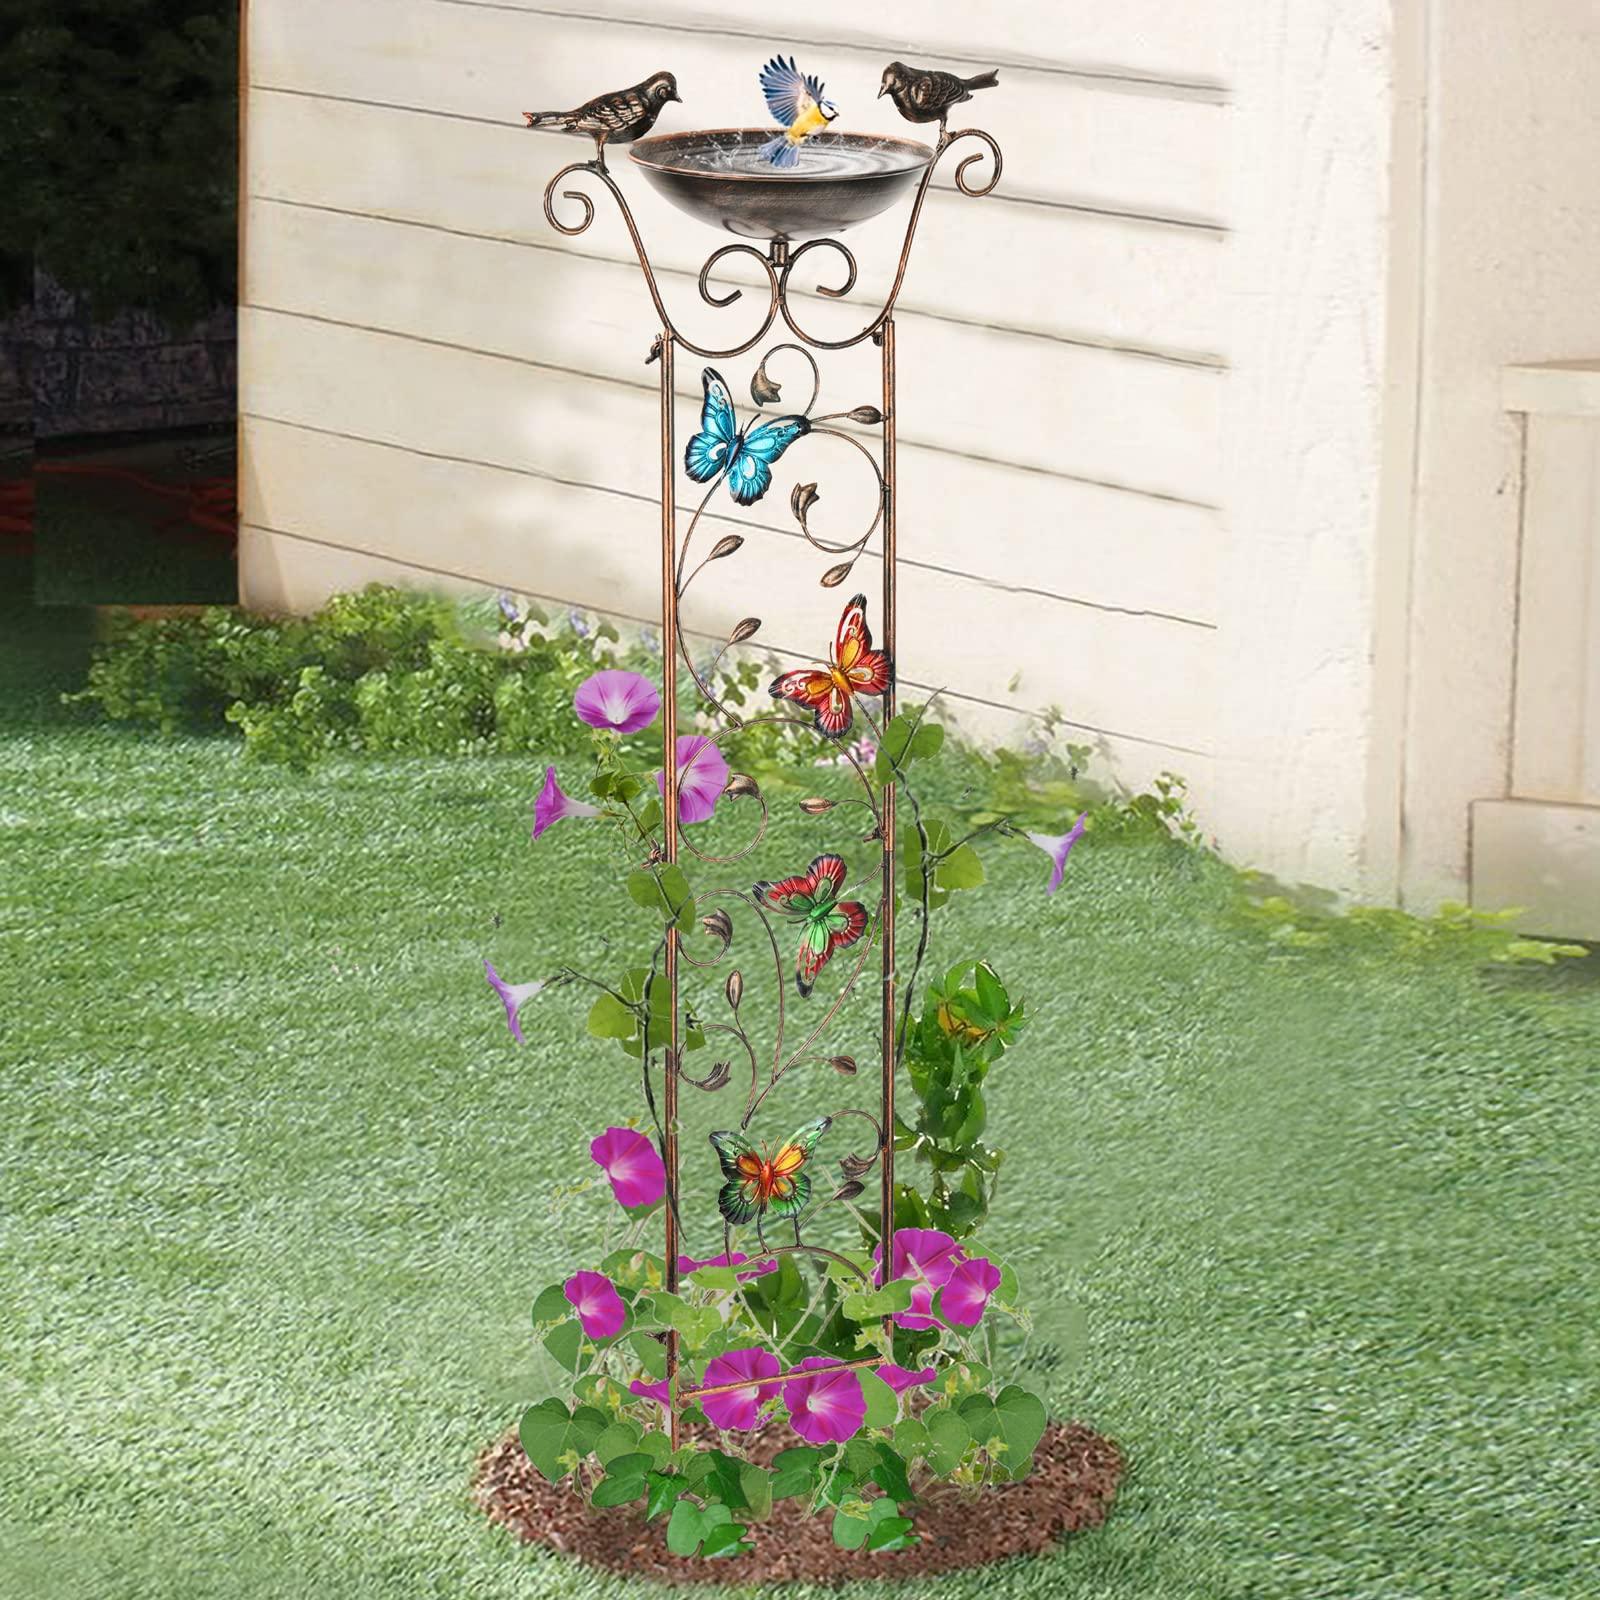 SUNNYPARK Bird Bath with Trellis Outdoor, Antique Garden Iron Trellis with Decorative Butterflies Detachable Bird Bowl Metal Potted Plants Support for Climbing Flowers - CookCave